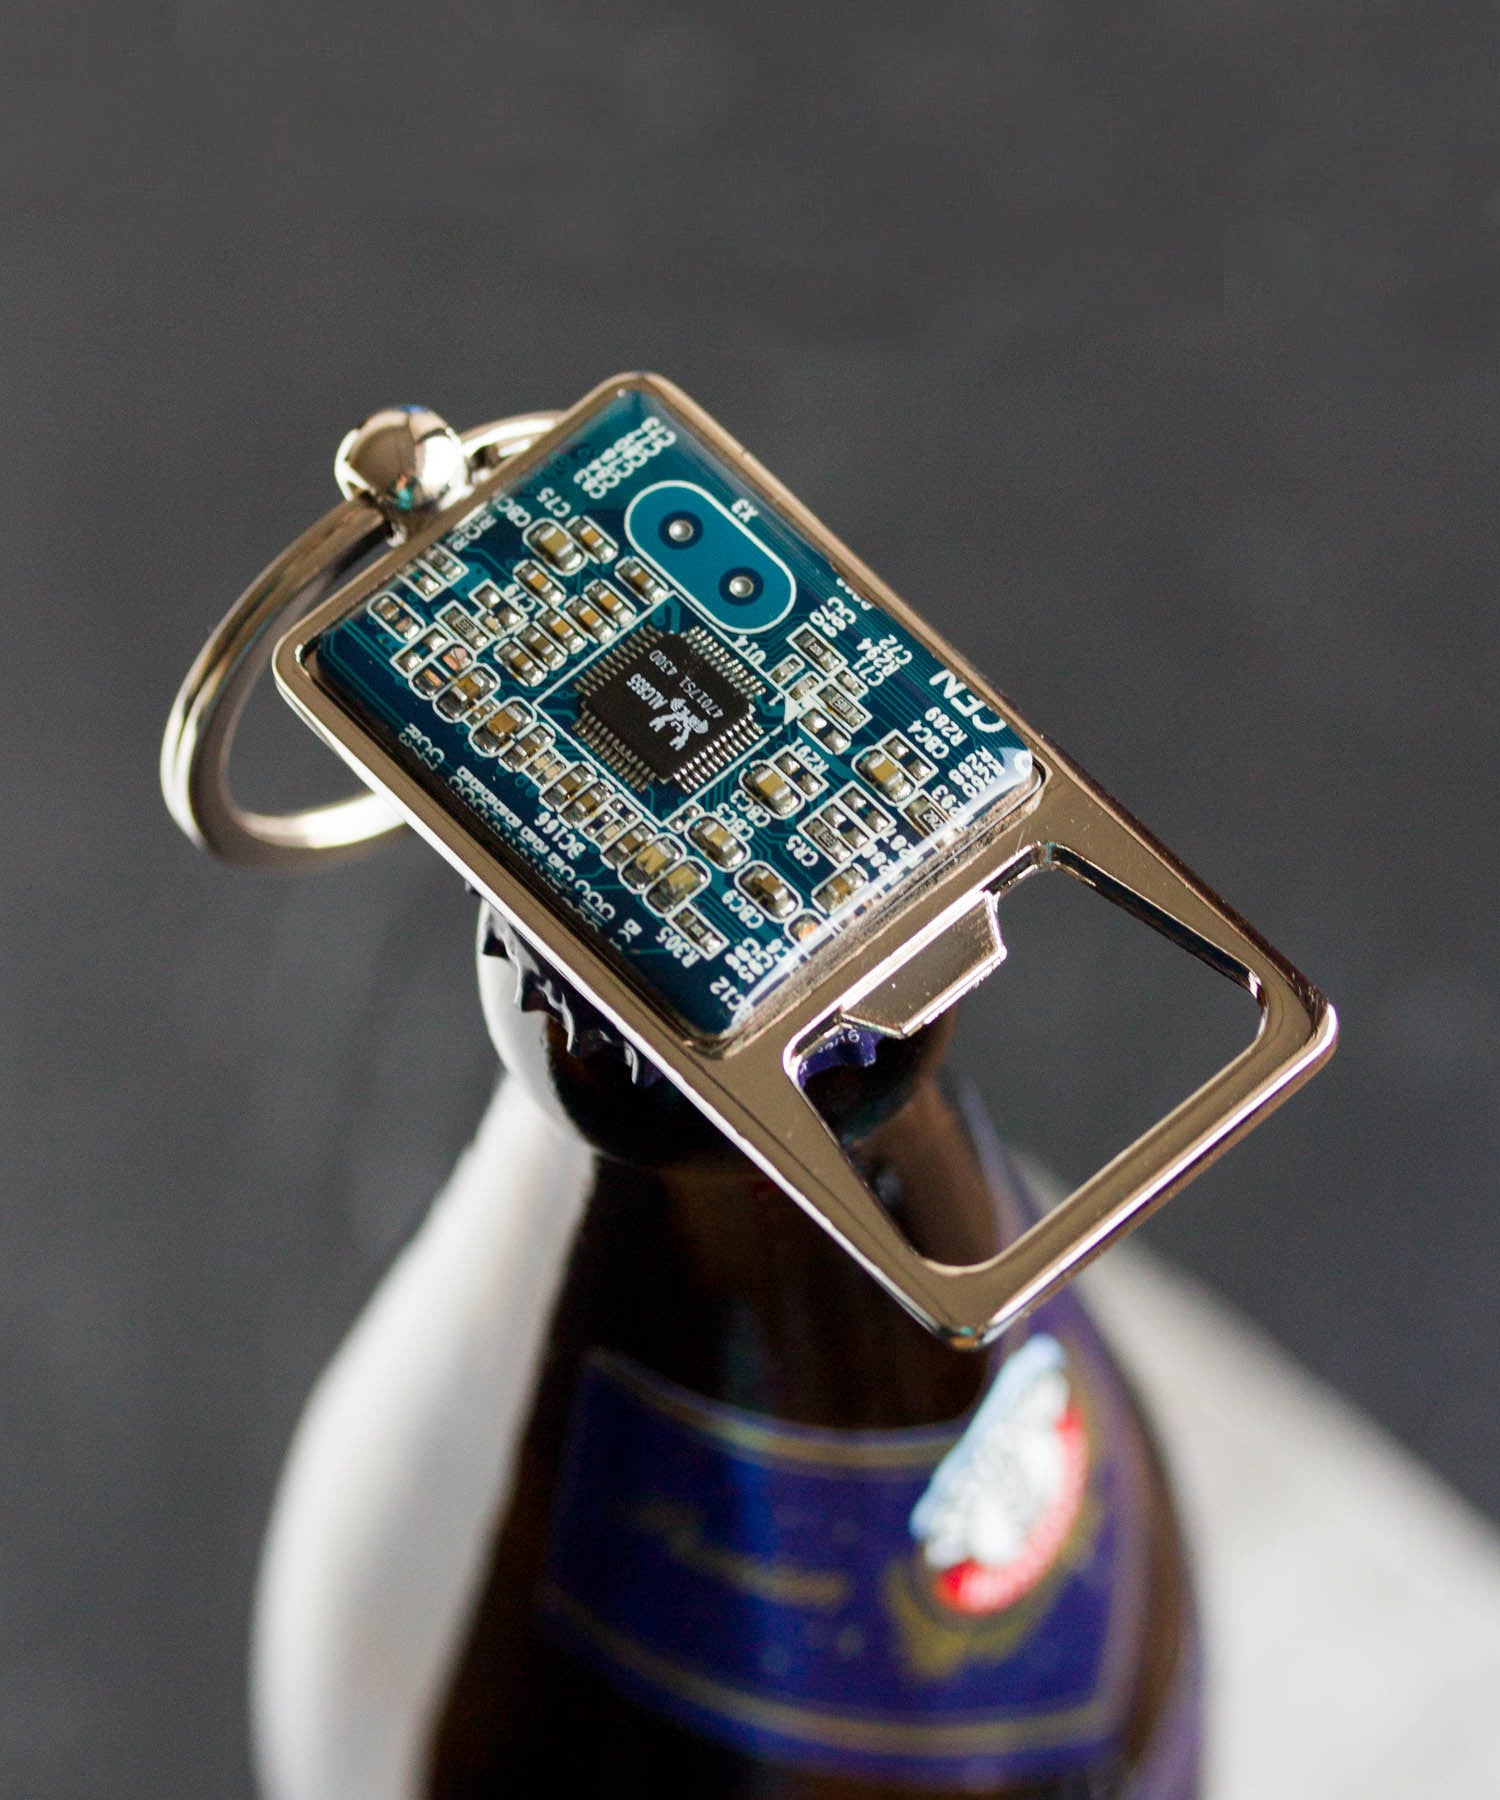 Bottle opener keychain with a circuit board piece